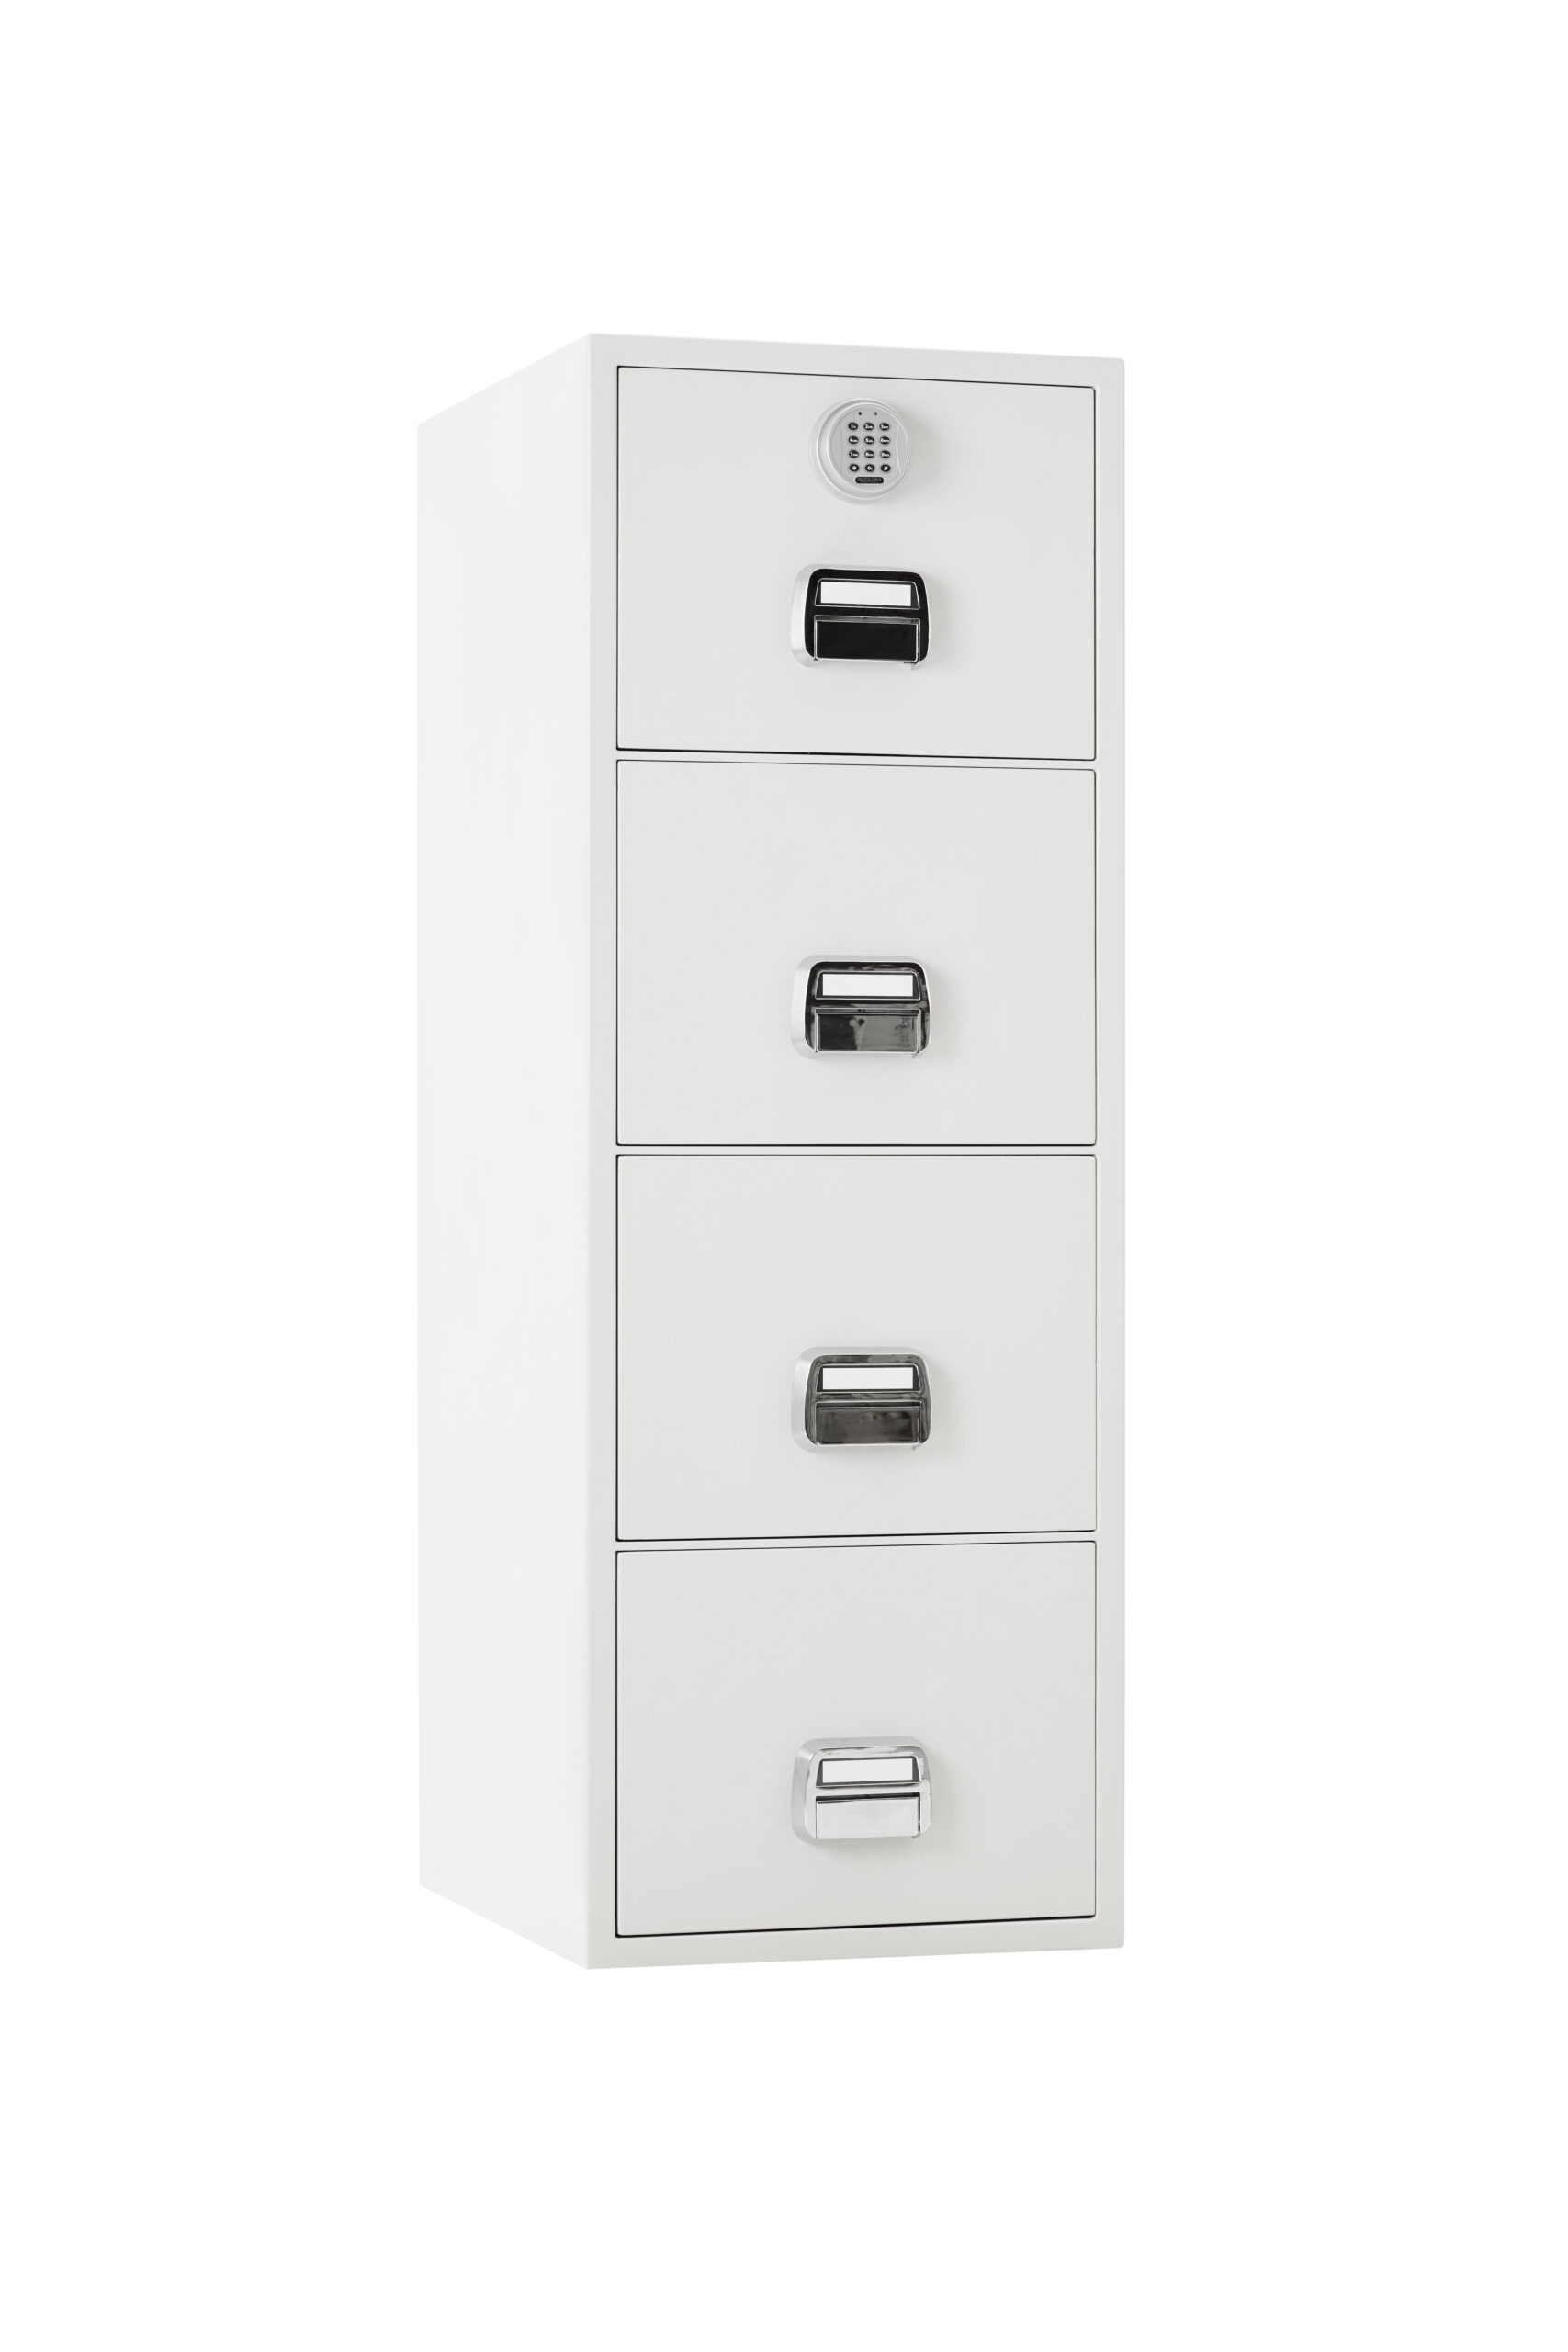 The De Raat SF 680 4EOX is a 4 drawer, 90 minute fire resistant filing cabinet for the protection of paper records. Perfect as an office filing cabinet with high security electronic code lock. This comes with the benefit of a free palletised delivery.